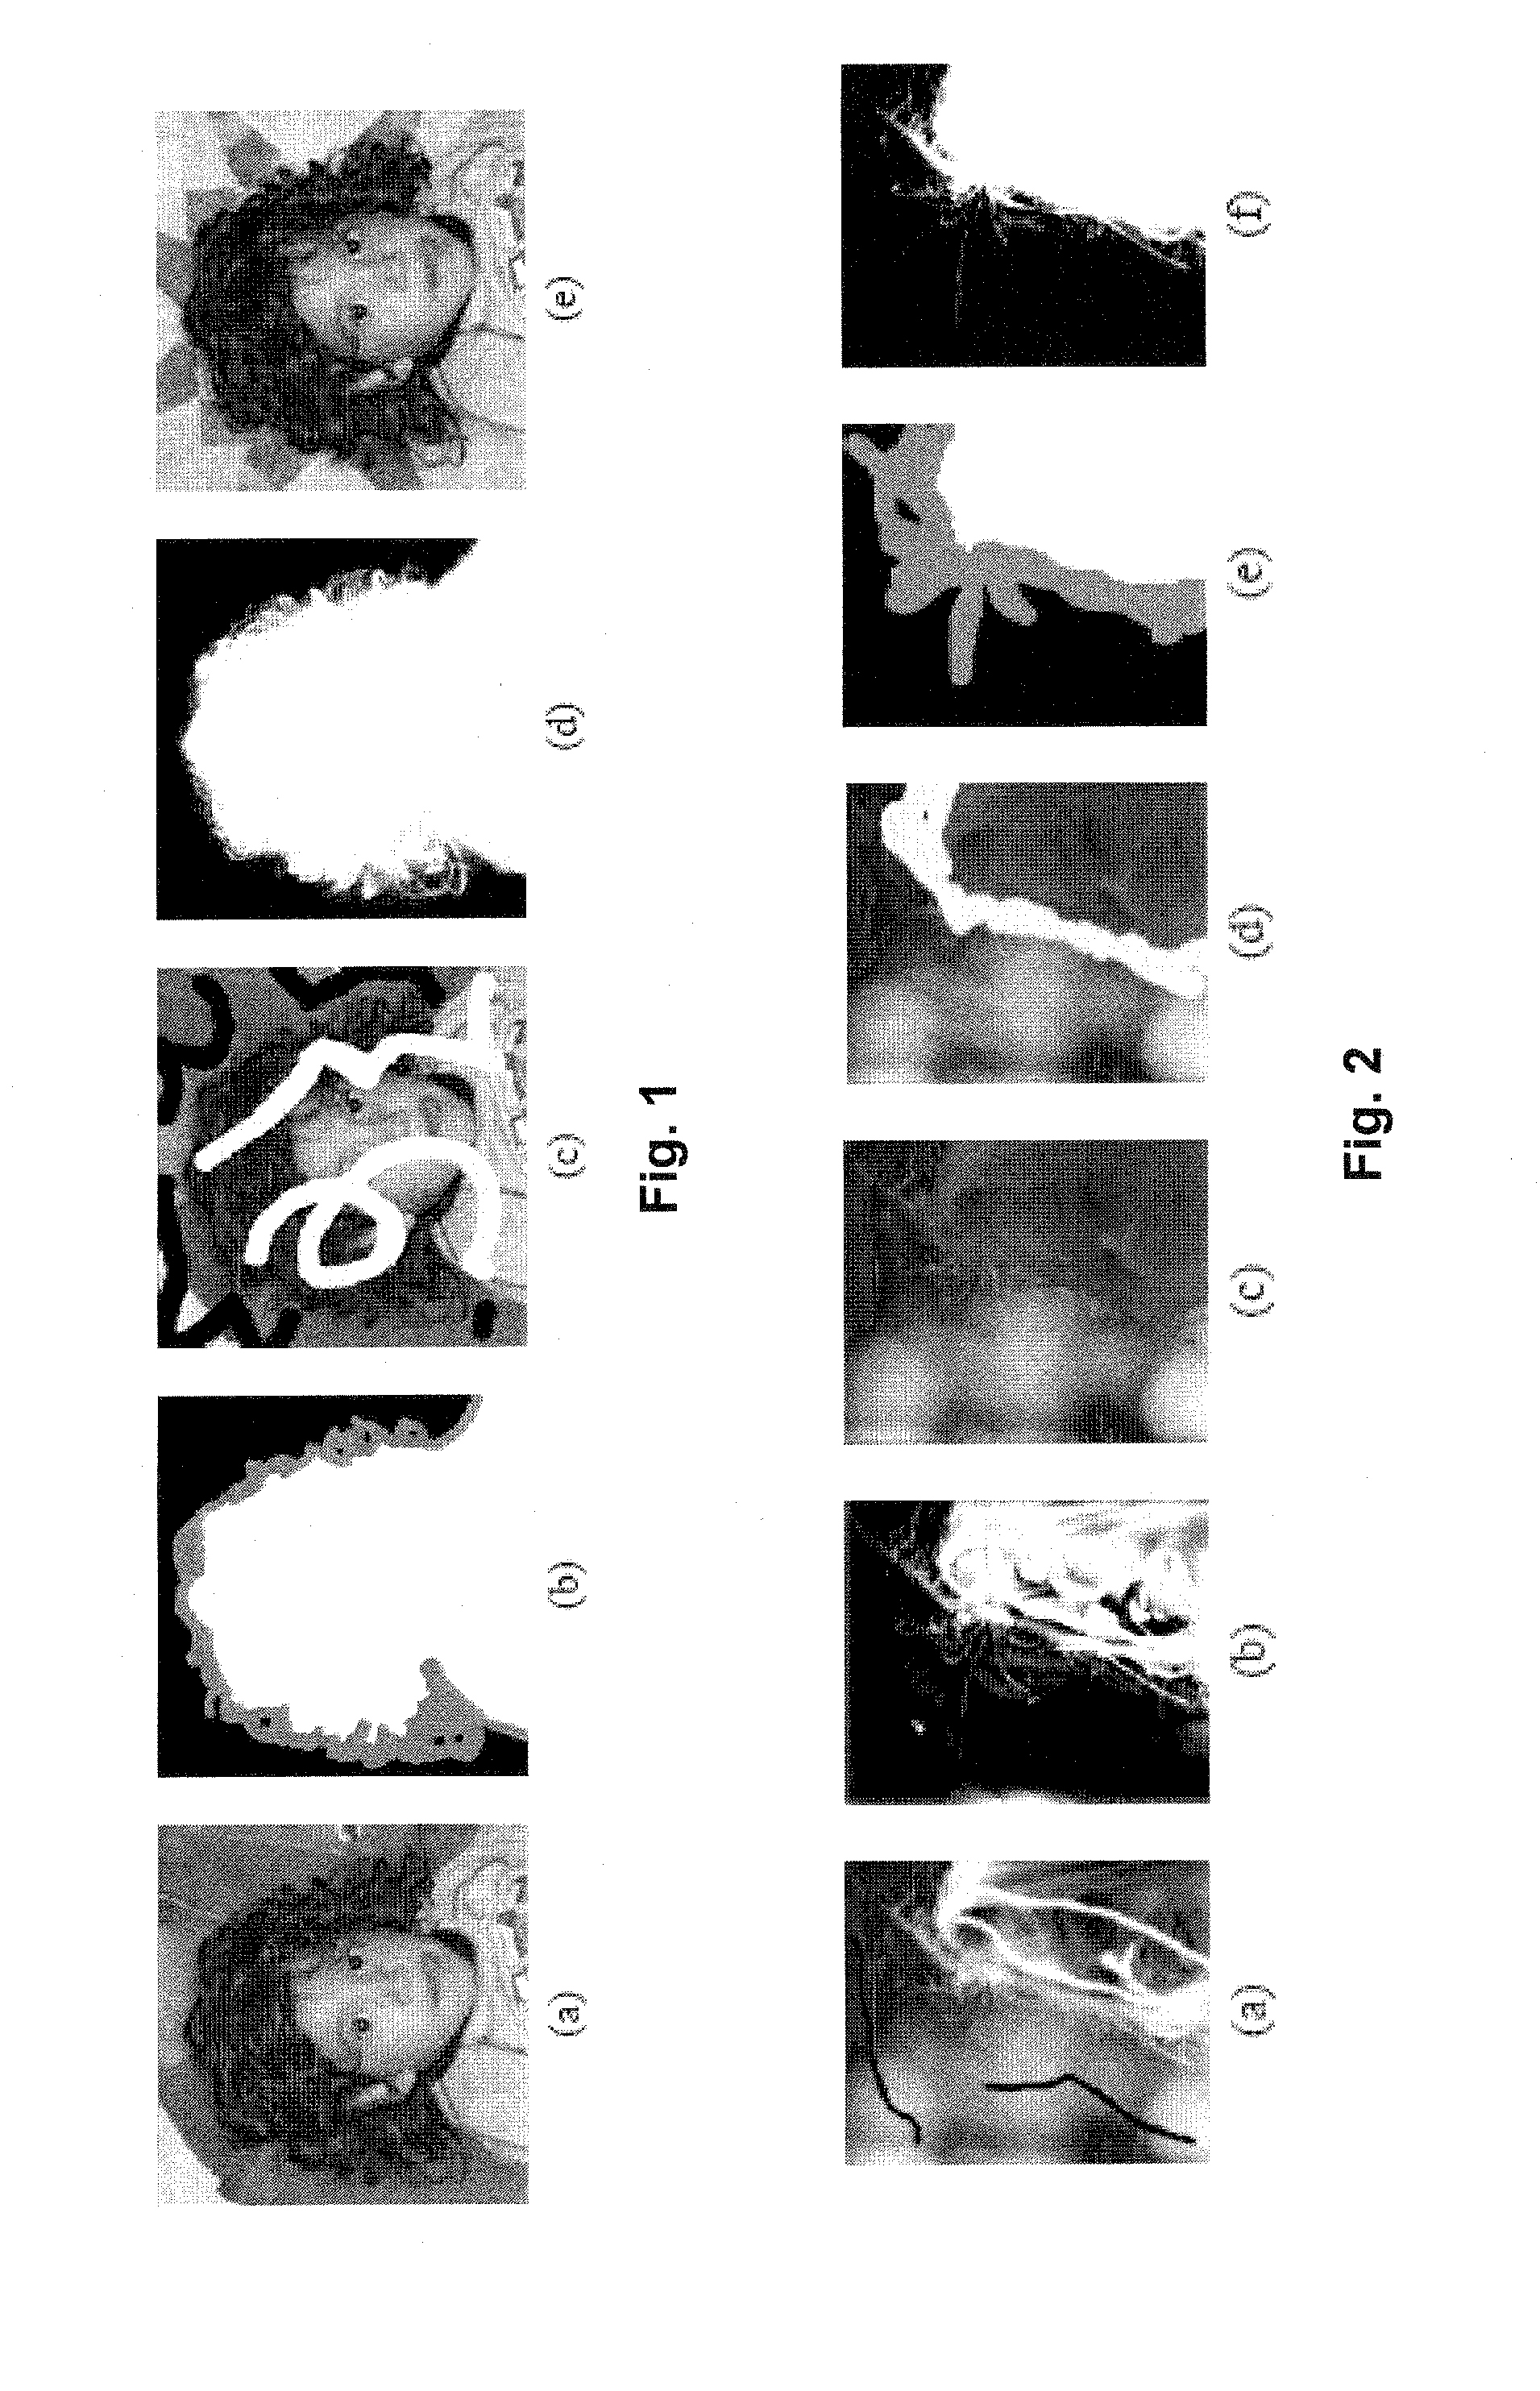 Closed form method and system for matting a foreground object in an image having a background